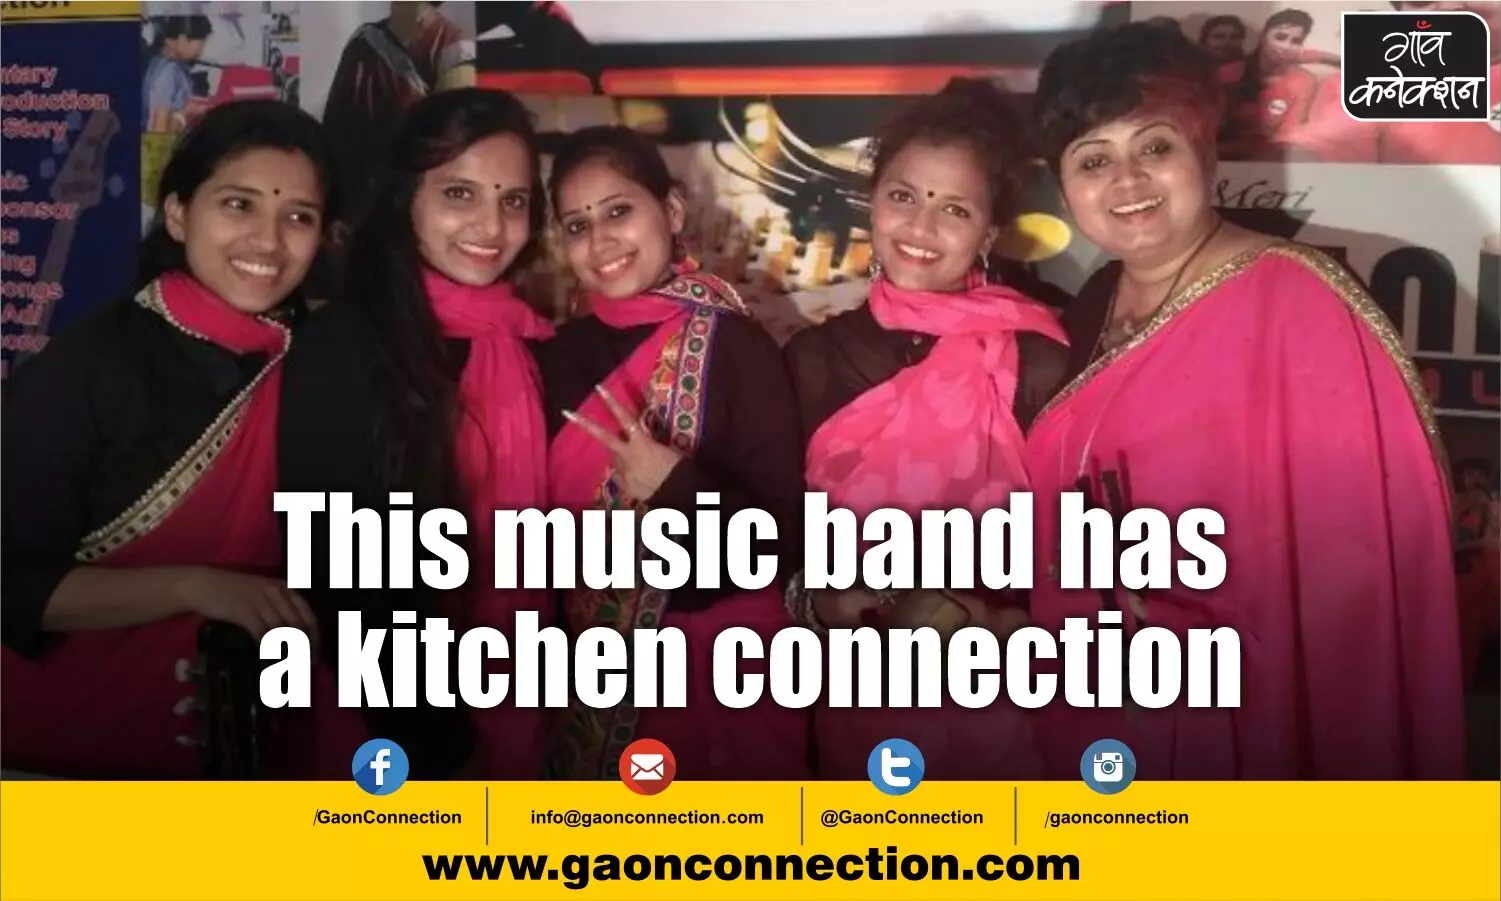 This all-girls band is cool. They use kitchen equipment to create music